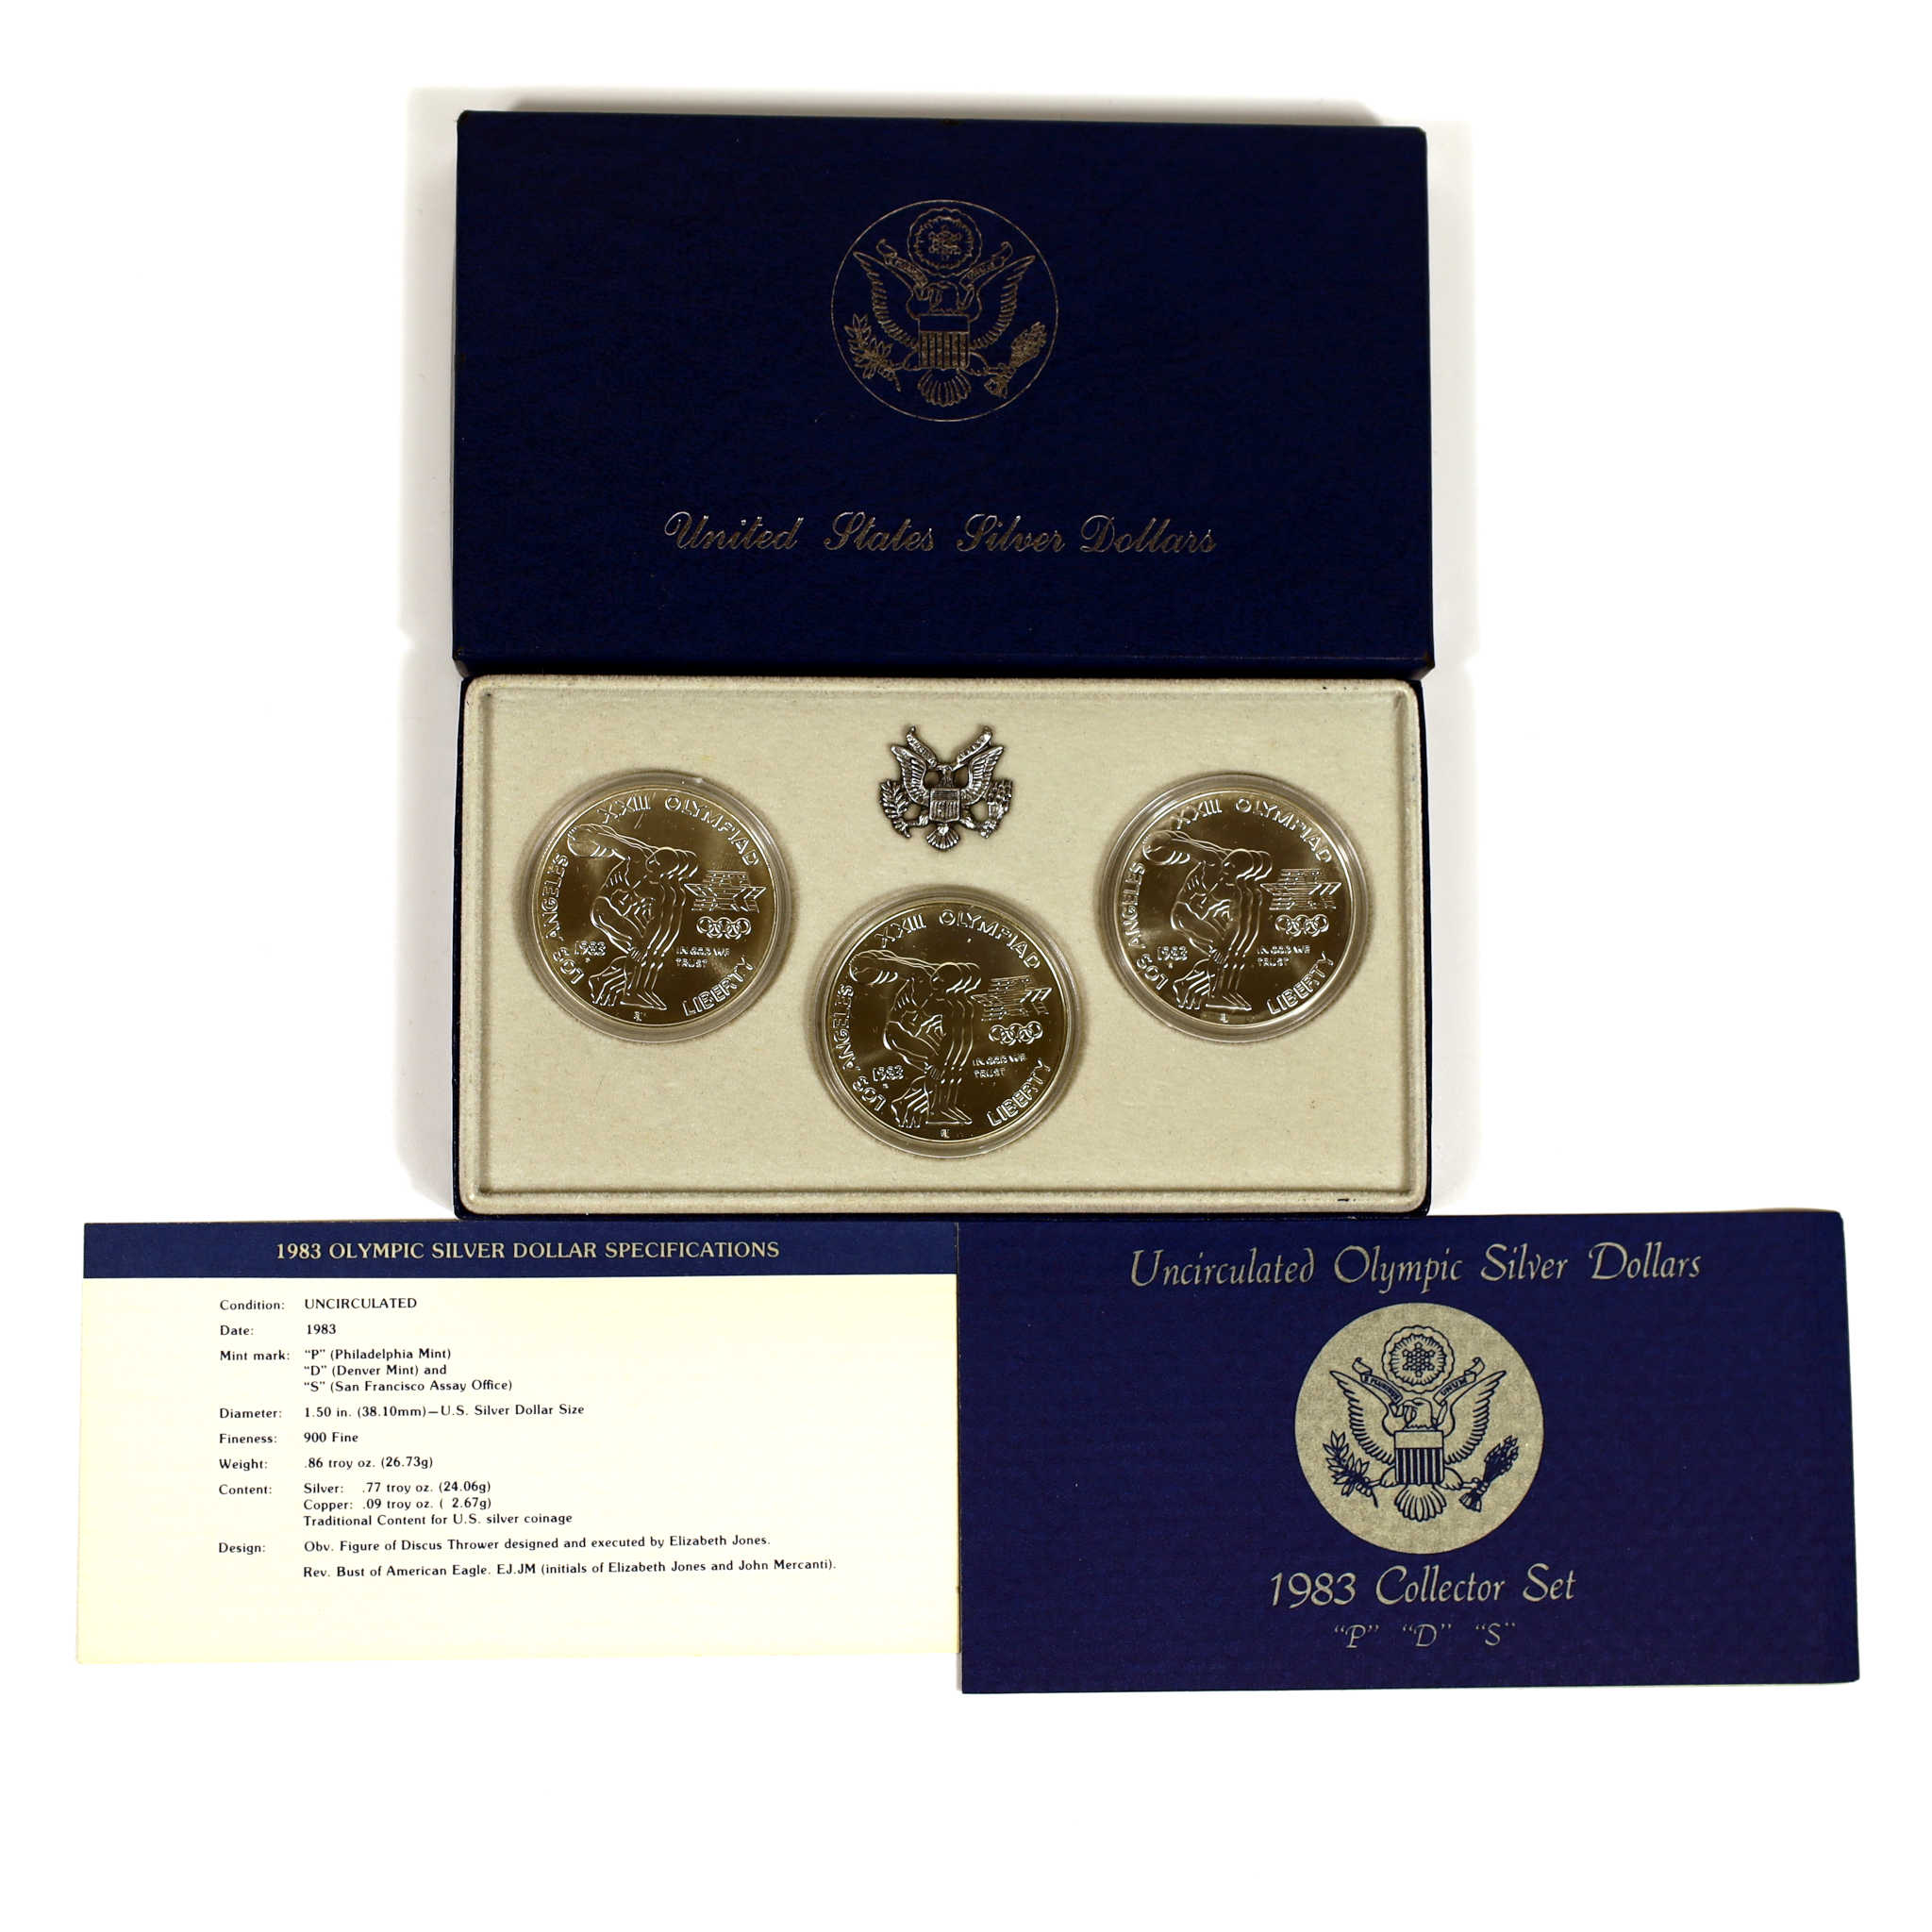 1983 Olympic Silver Dollar 3 Coin Set Uncirculated OGP SKU:I11670